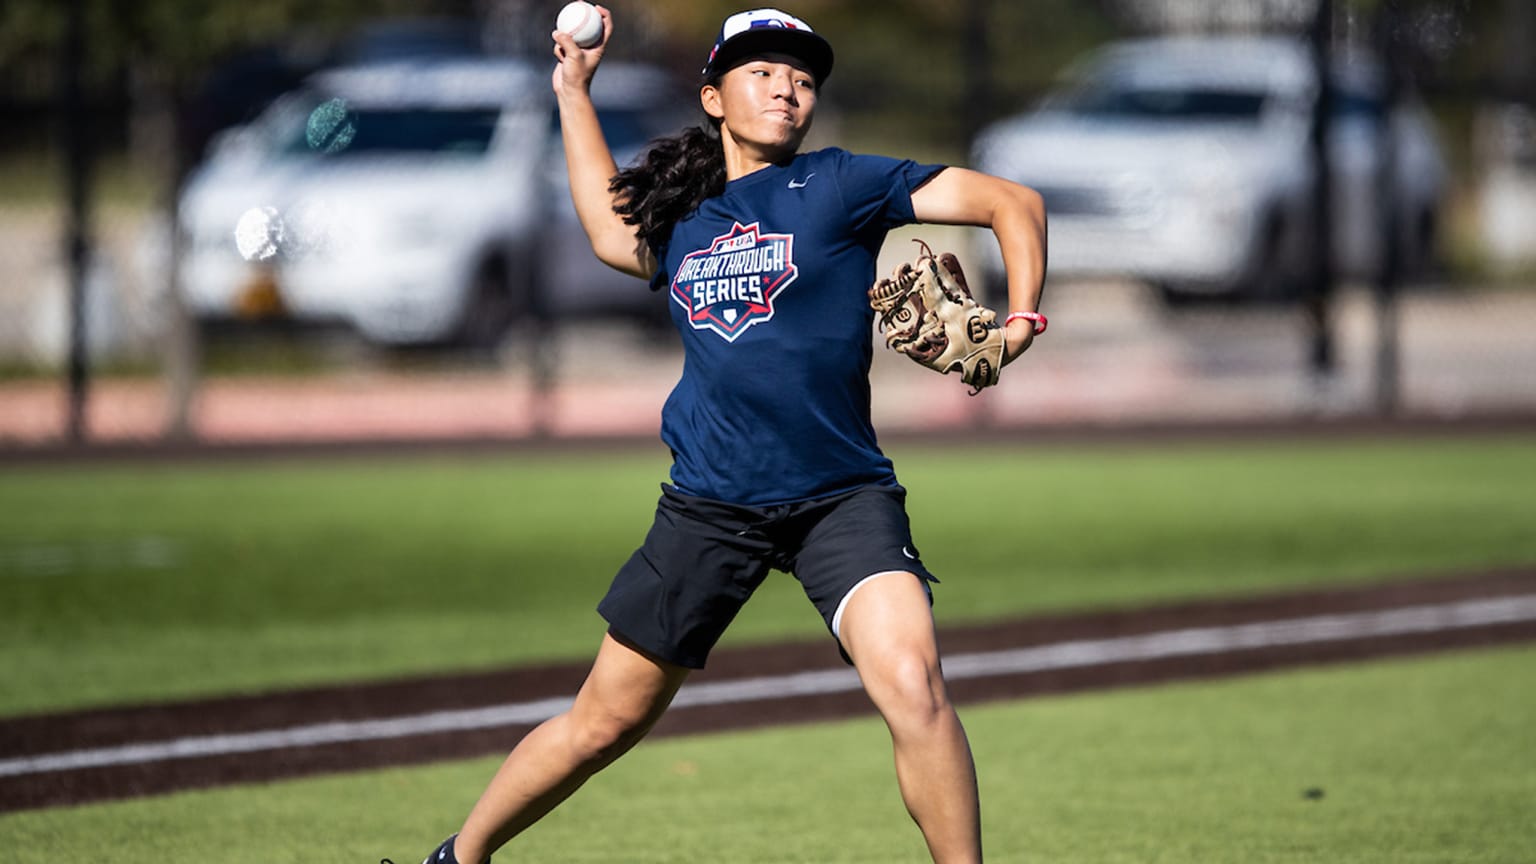 Olivia Pichardo first female baseball player to be on an active NCAA Division I roster